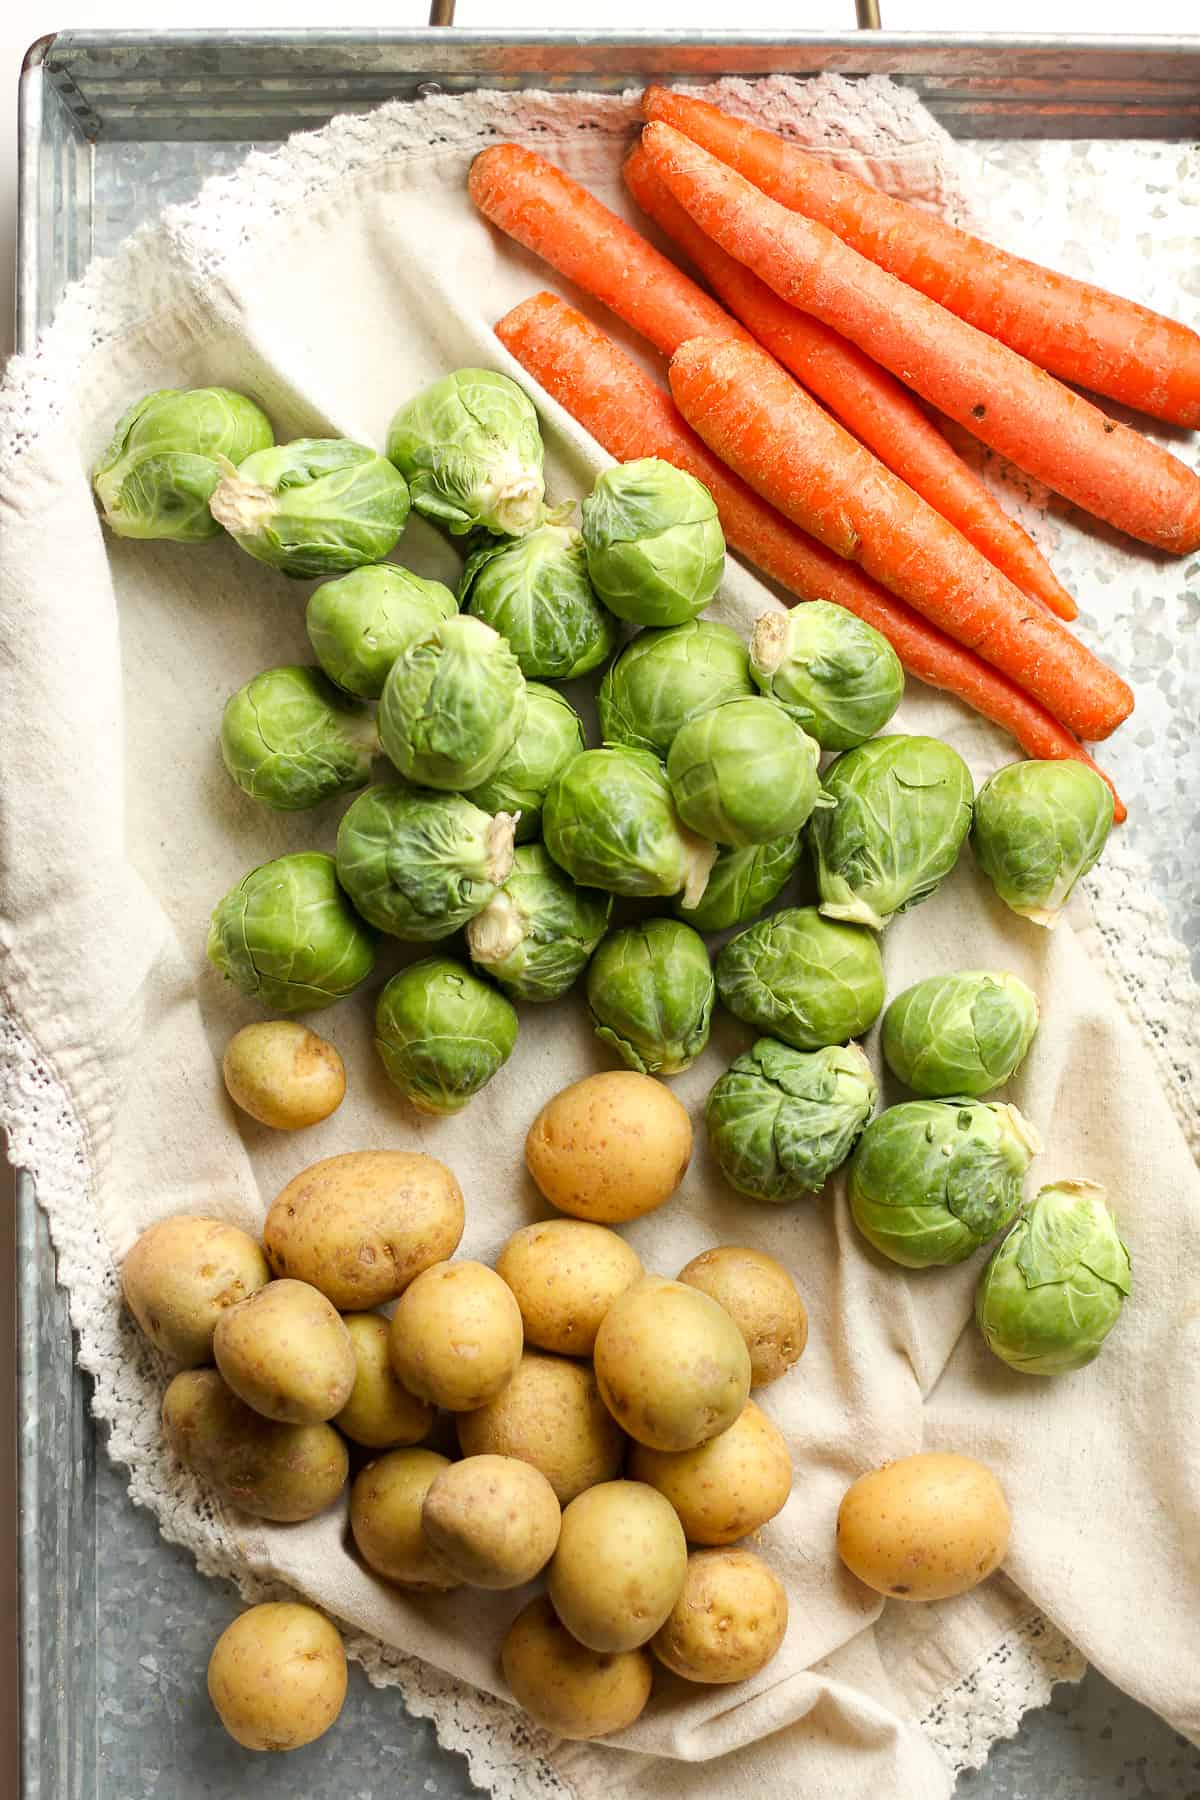 A tray of whole carrots, Brussels sprouts, and potatoes.